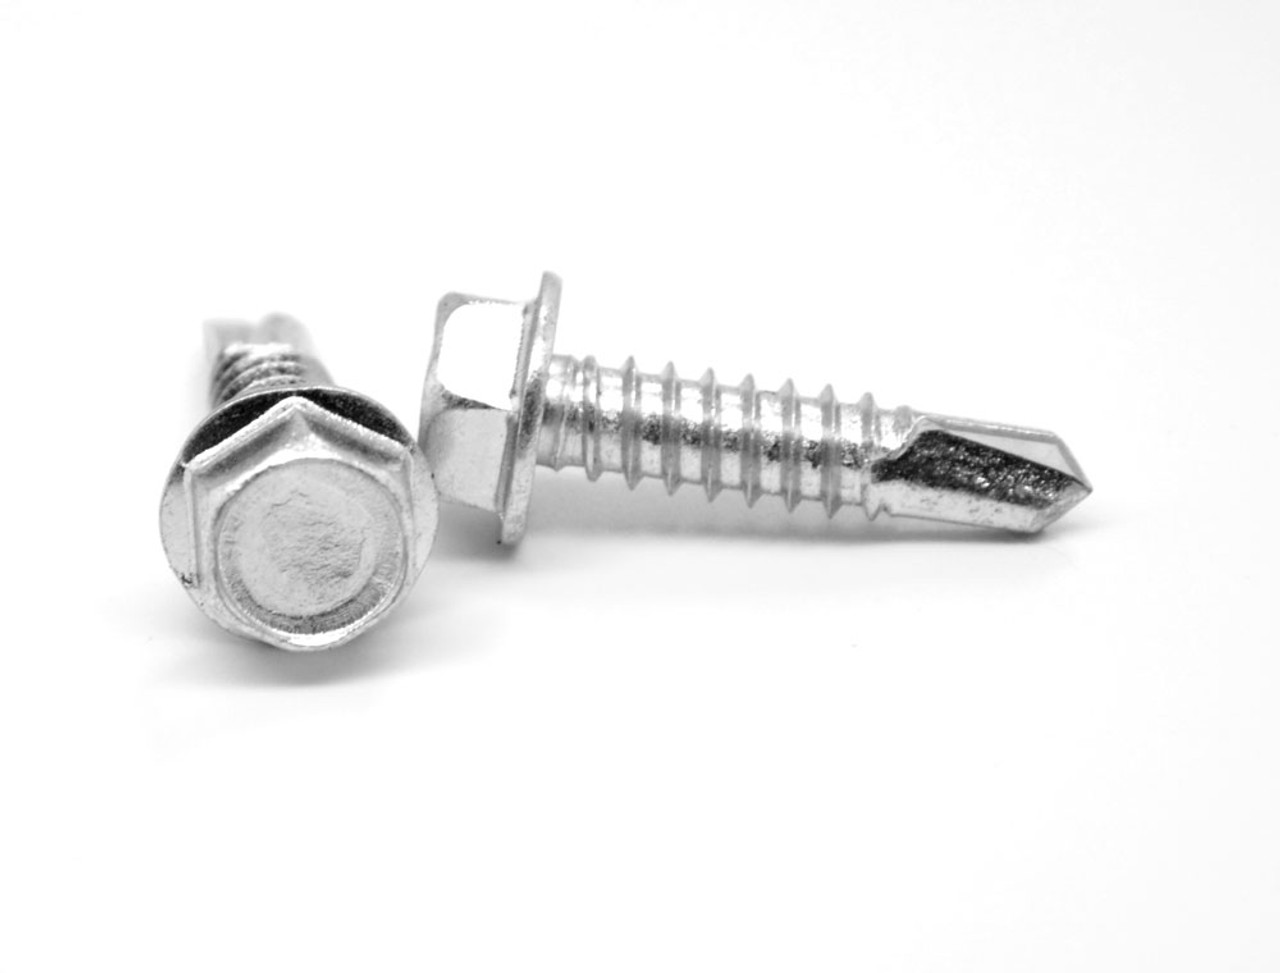 #10-16 x 2 1/2" (FT) Self Drilling Screw Hex Washer Head #3 Point Stainless Steel 410